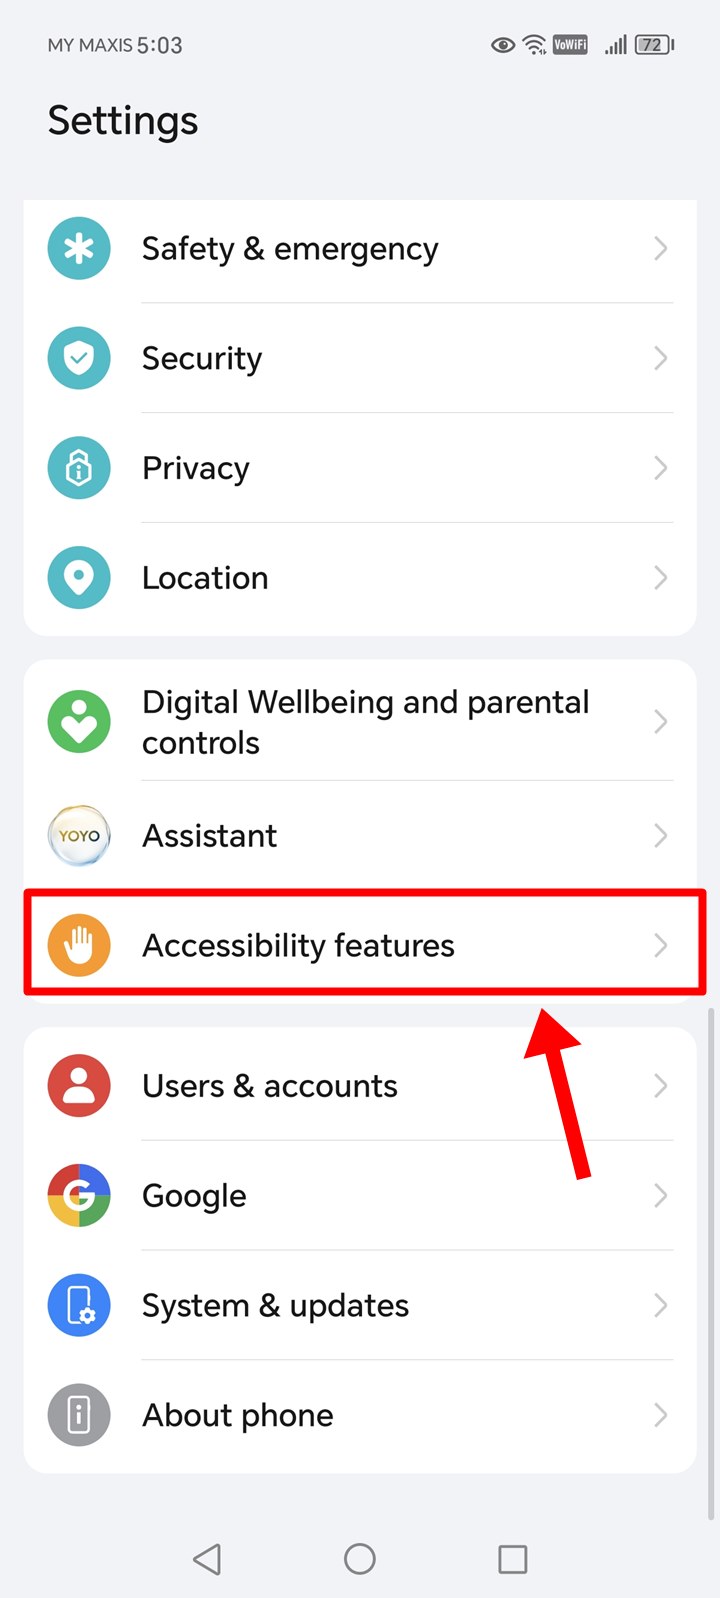 The "Accessibility Features" option is highlighted on this Honor phone.